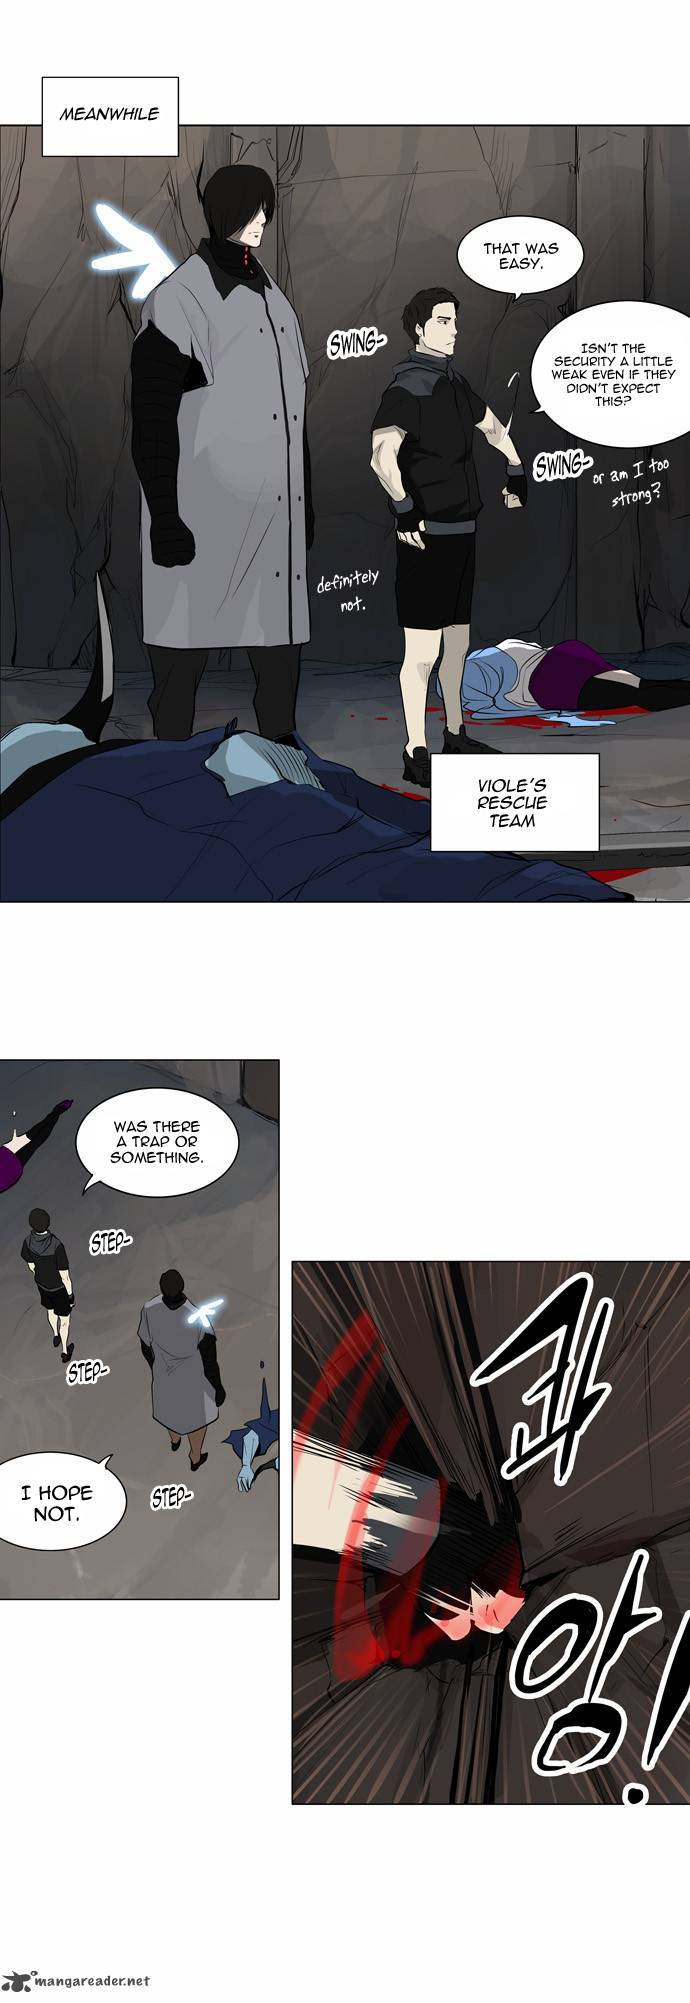 Tower Of God 170 15